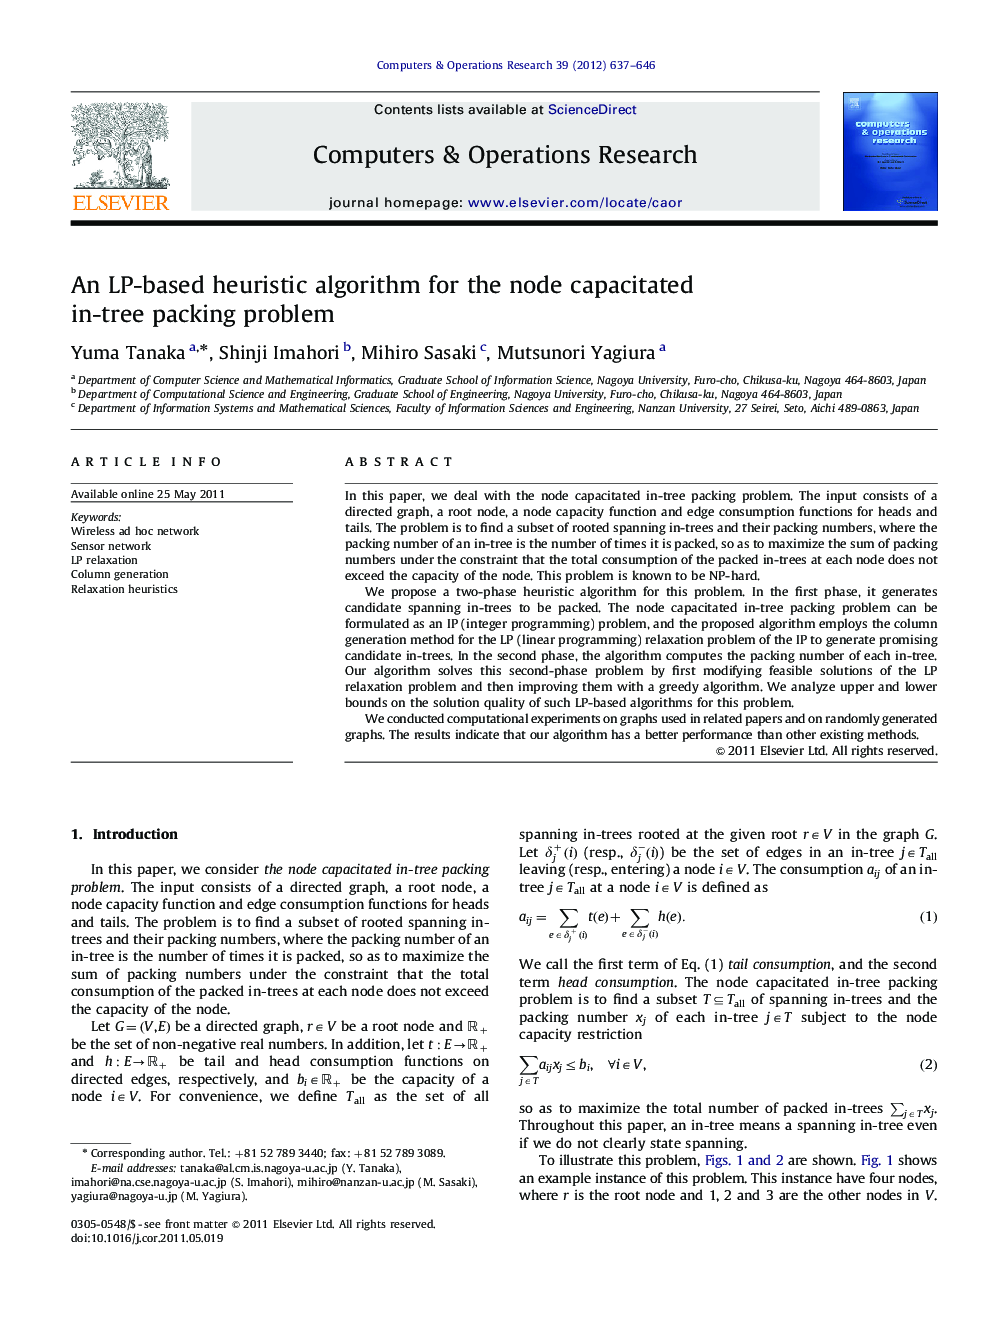 An LP-based heuristic algorithm for the node capacitated in-tree packing problem